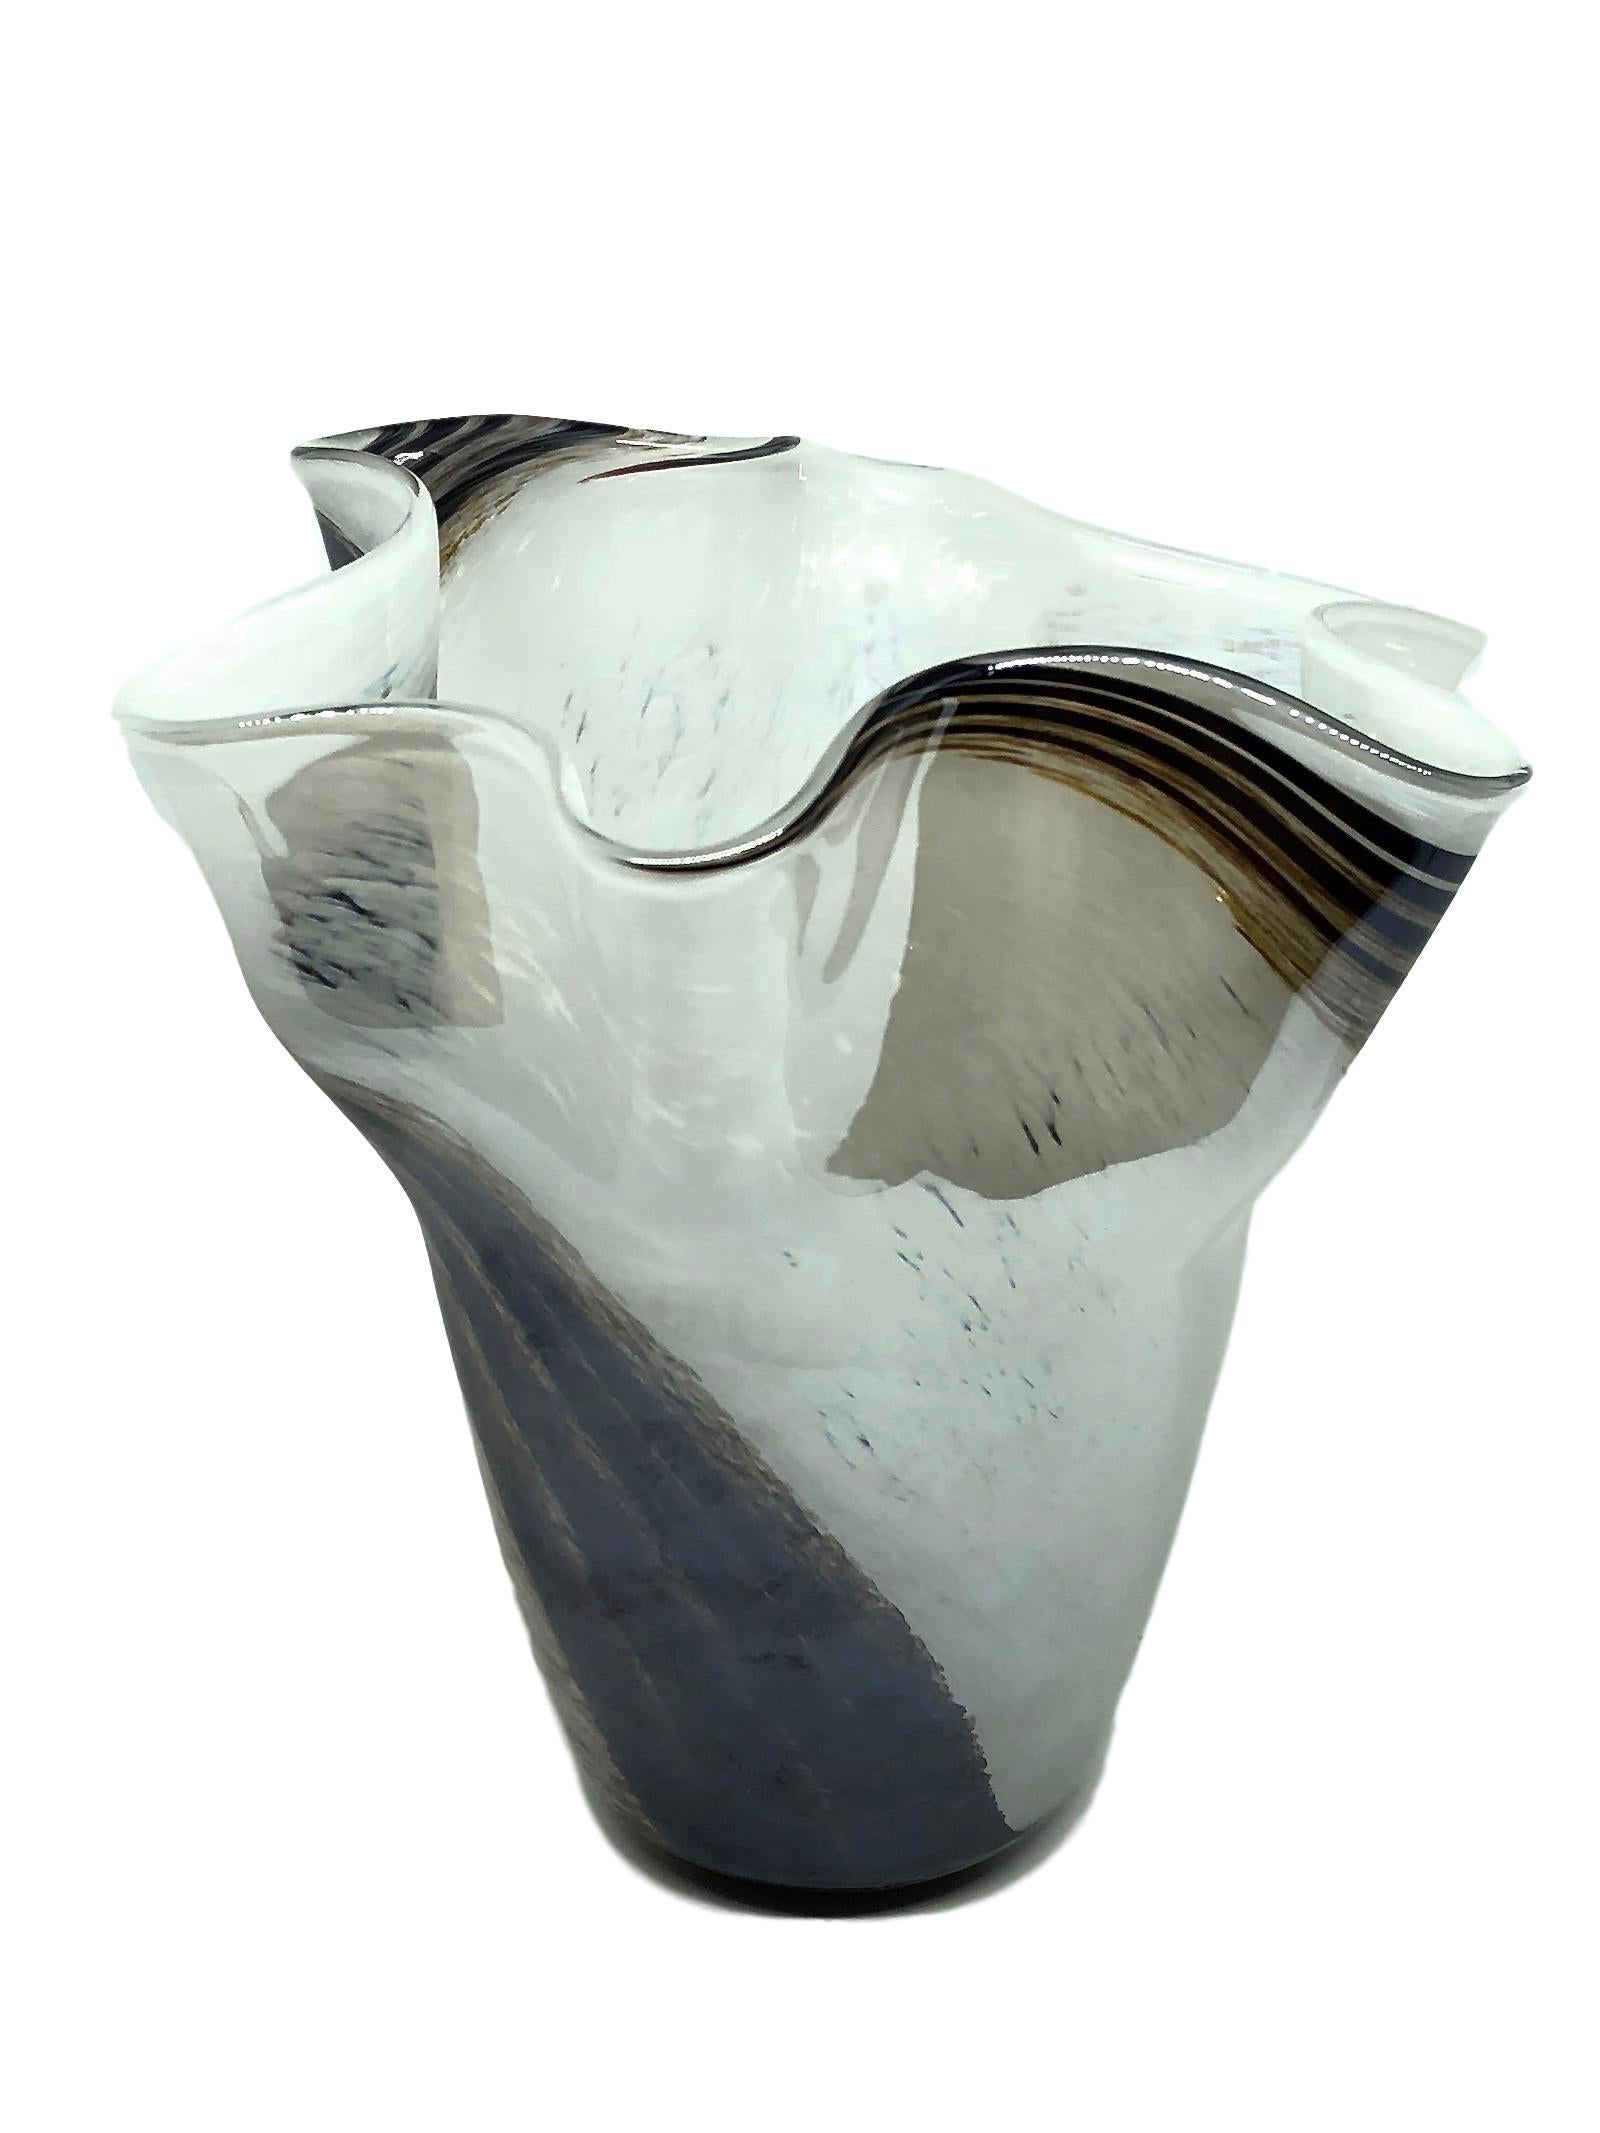 Beautiful Murano hand blown white, different brown shades and gray Italian art glass handkerchief / fazzoletto vase. Created by the Fratelli Toso company. Measures 9 1/4